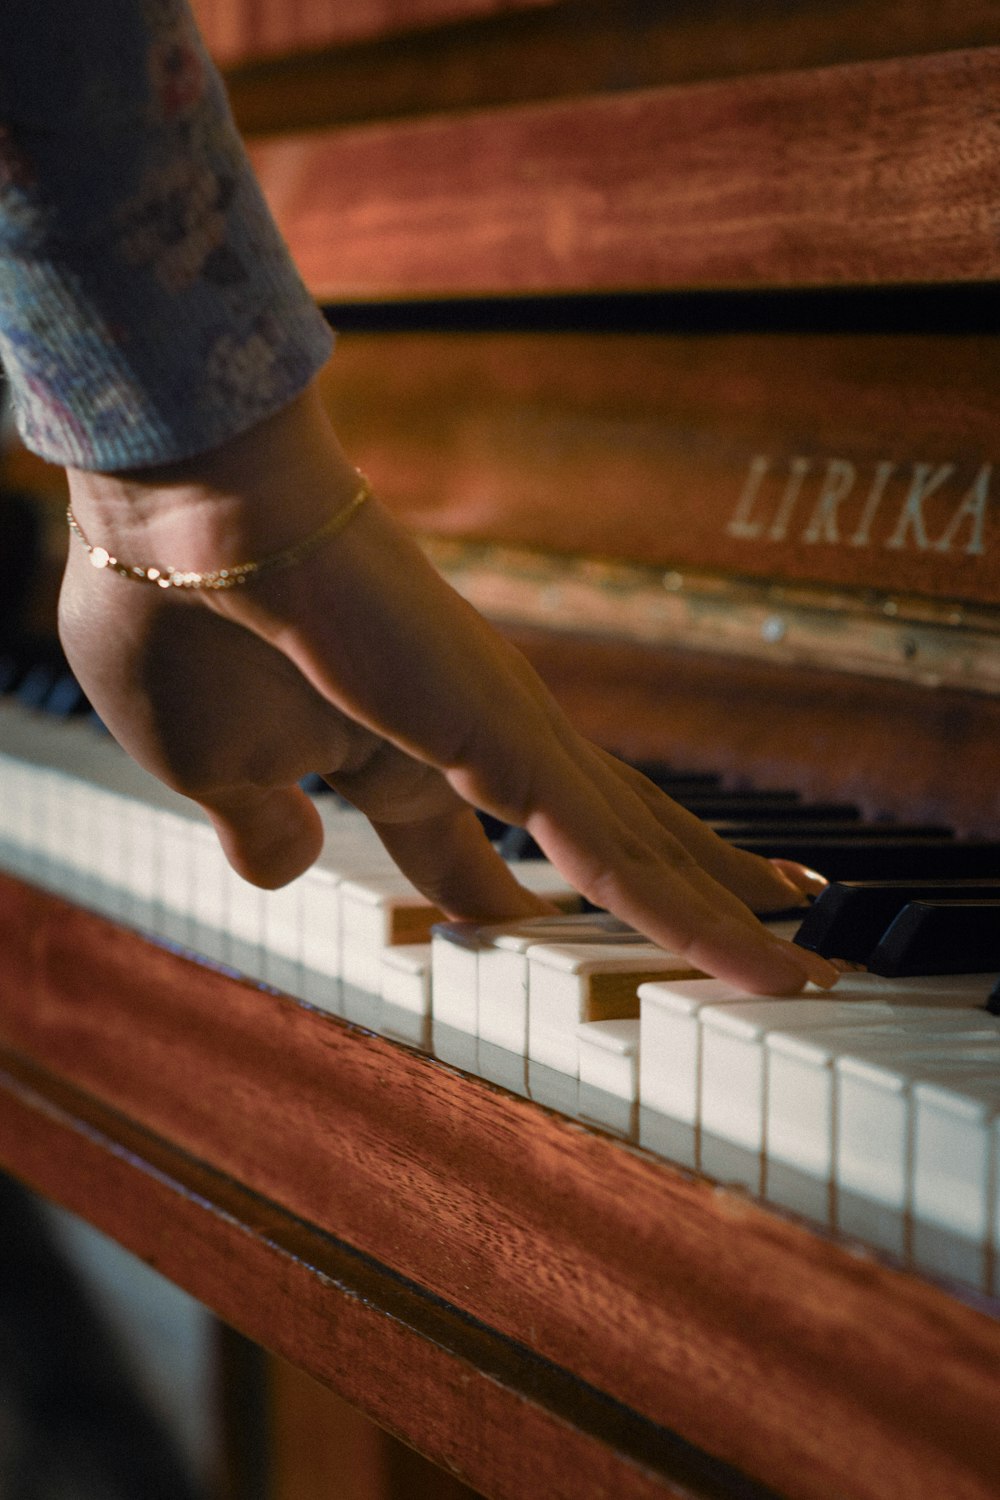 a person's hand on top of a piano